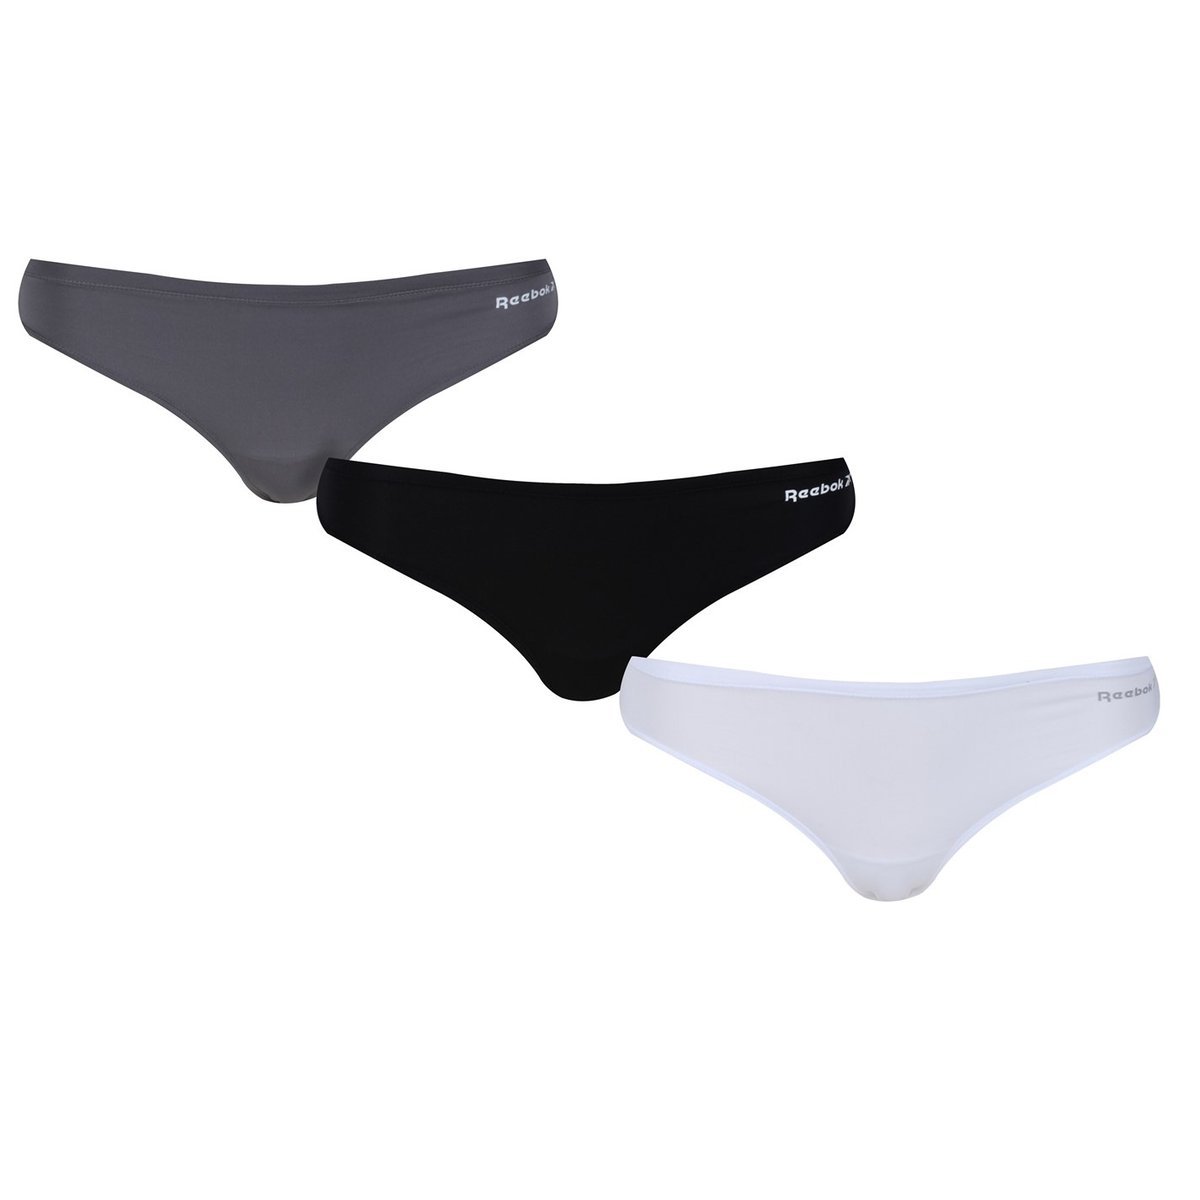 Reebok Pansy 3 pack thongs in blue grey and white